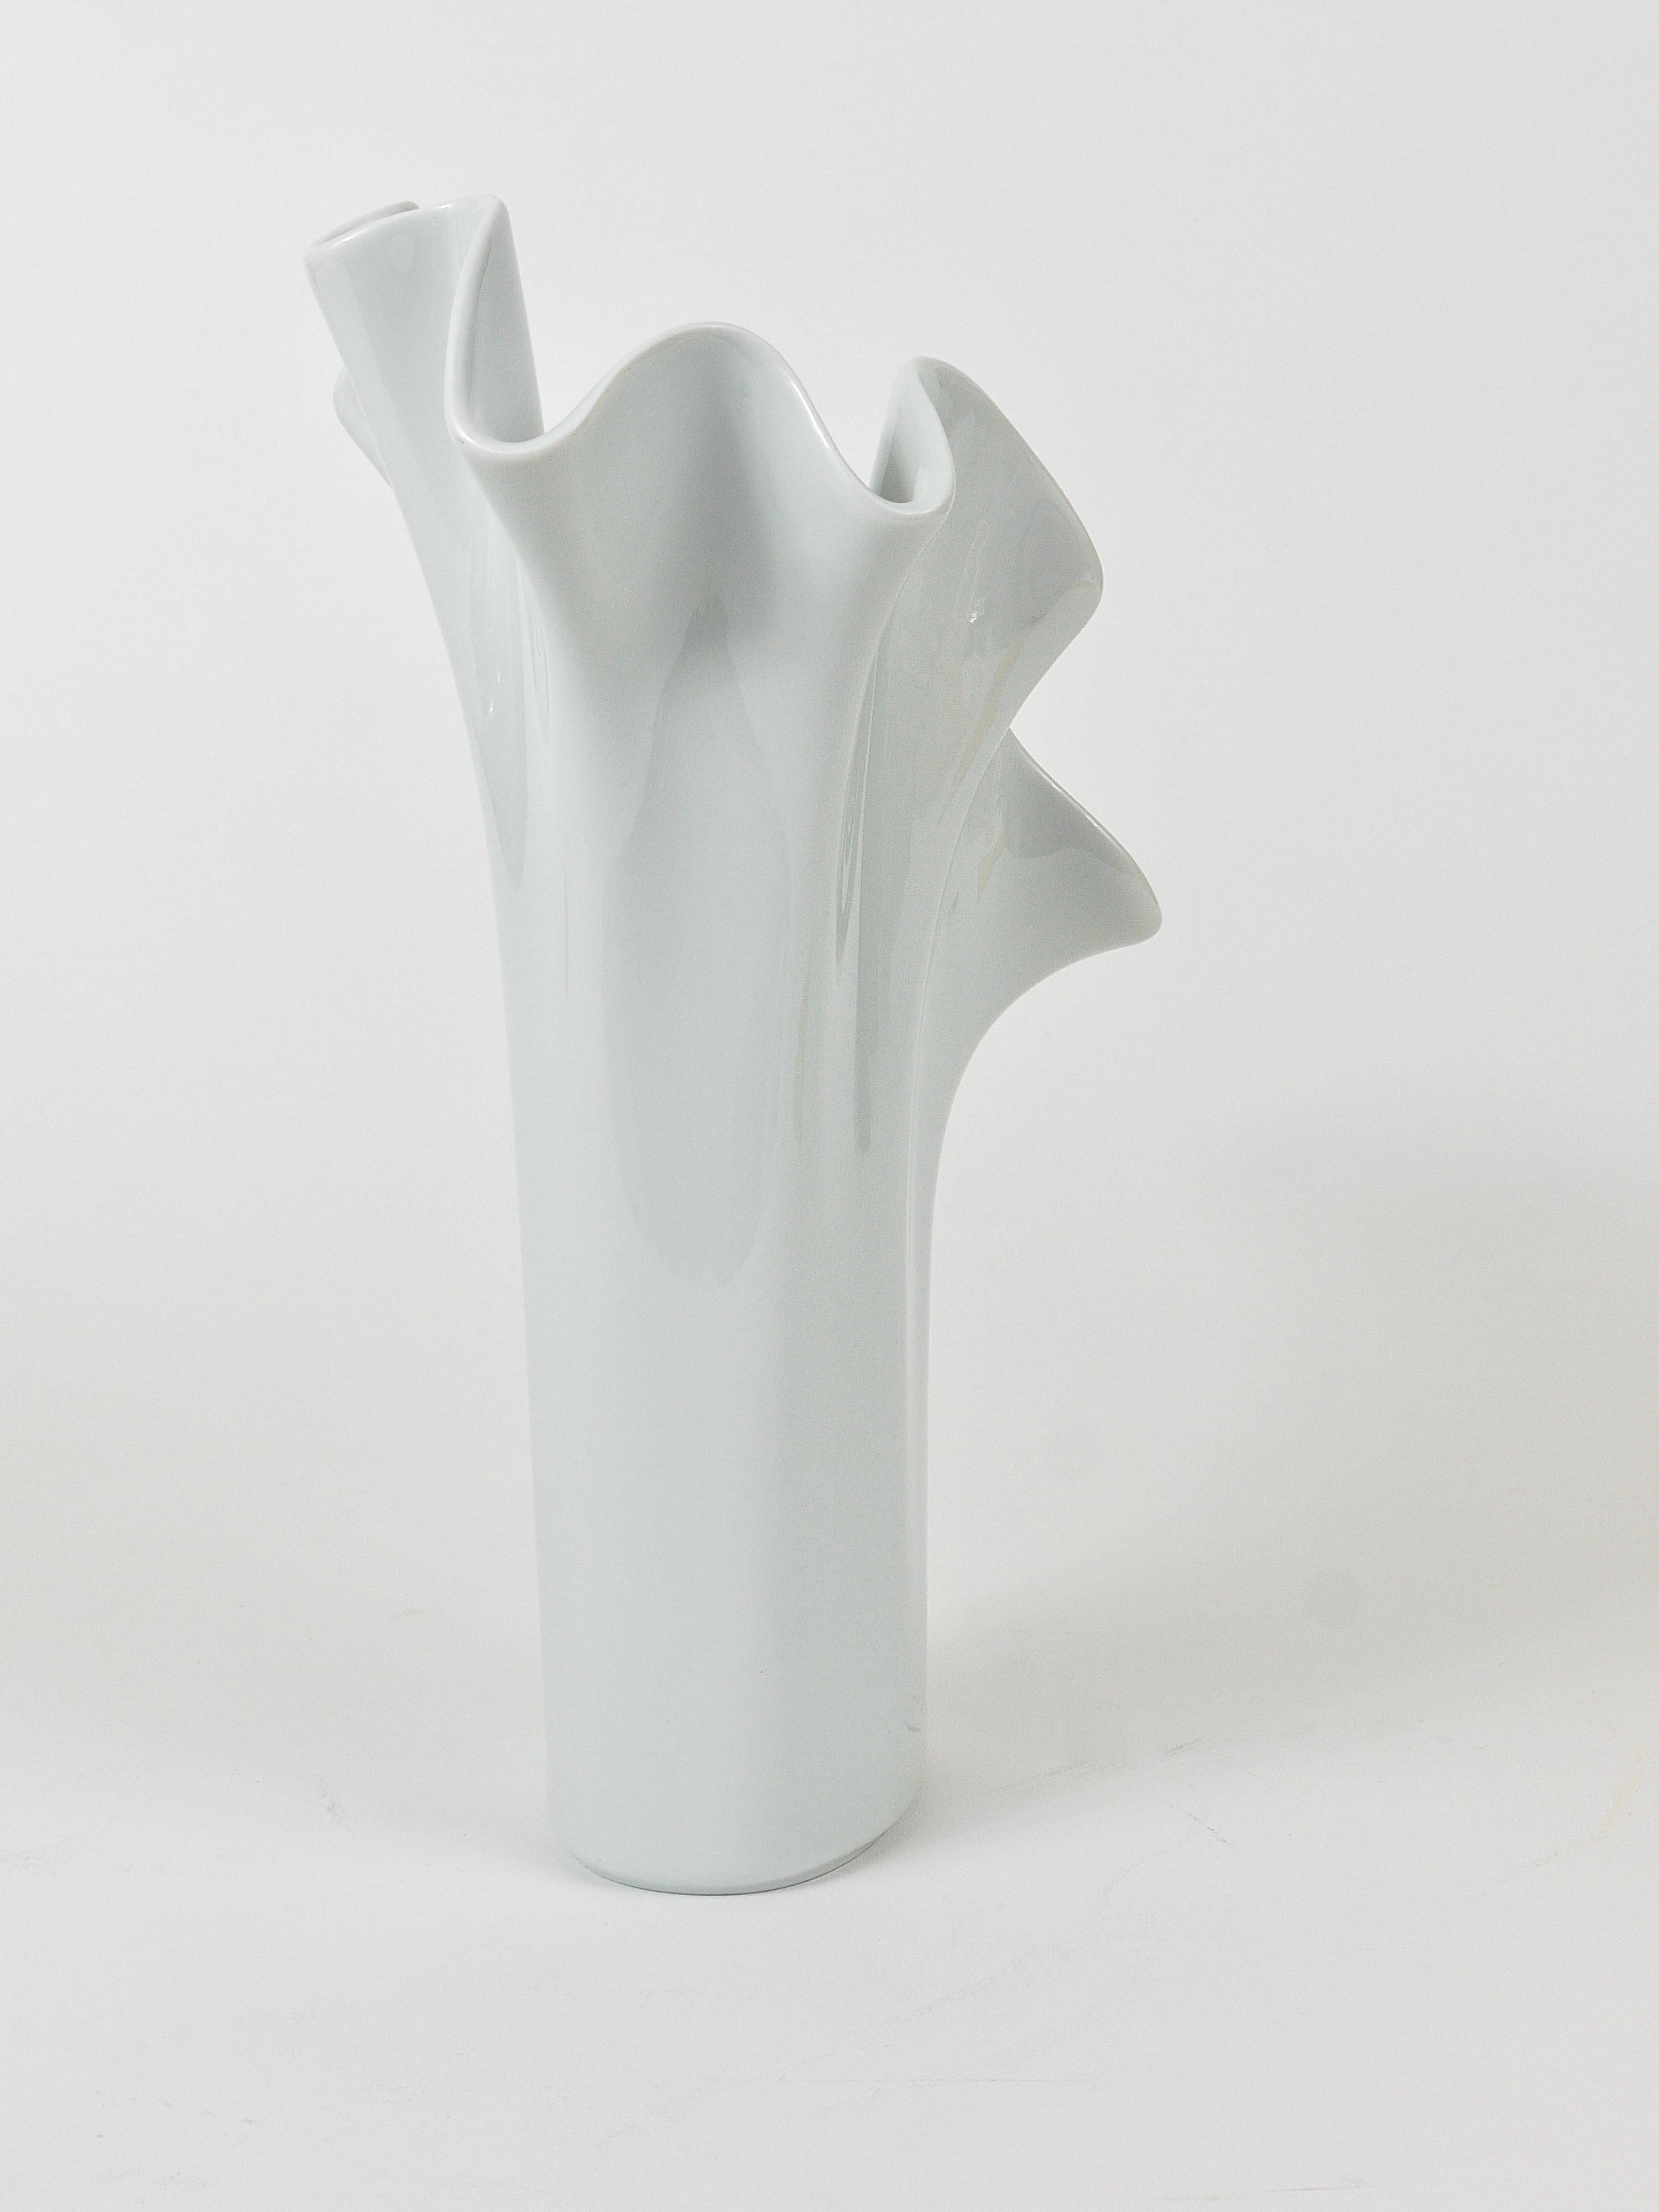 20th Century Rosenthal Studio-line Fazzoletto Asym Vase by Claus Josef Riedel, Germany, 1970s